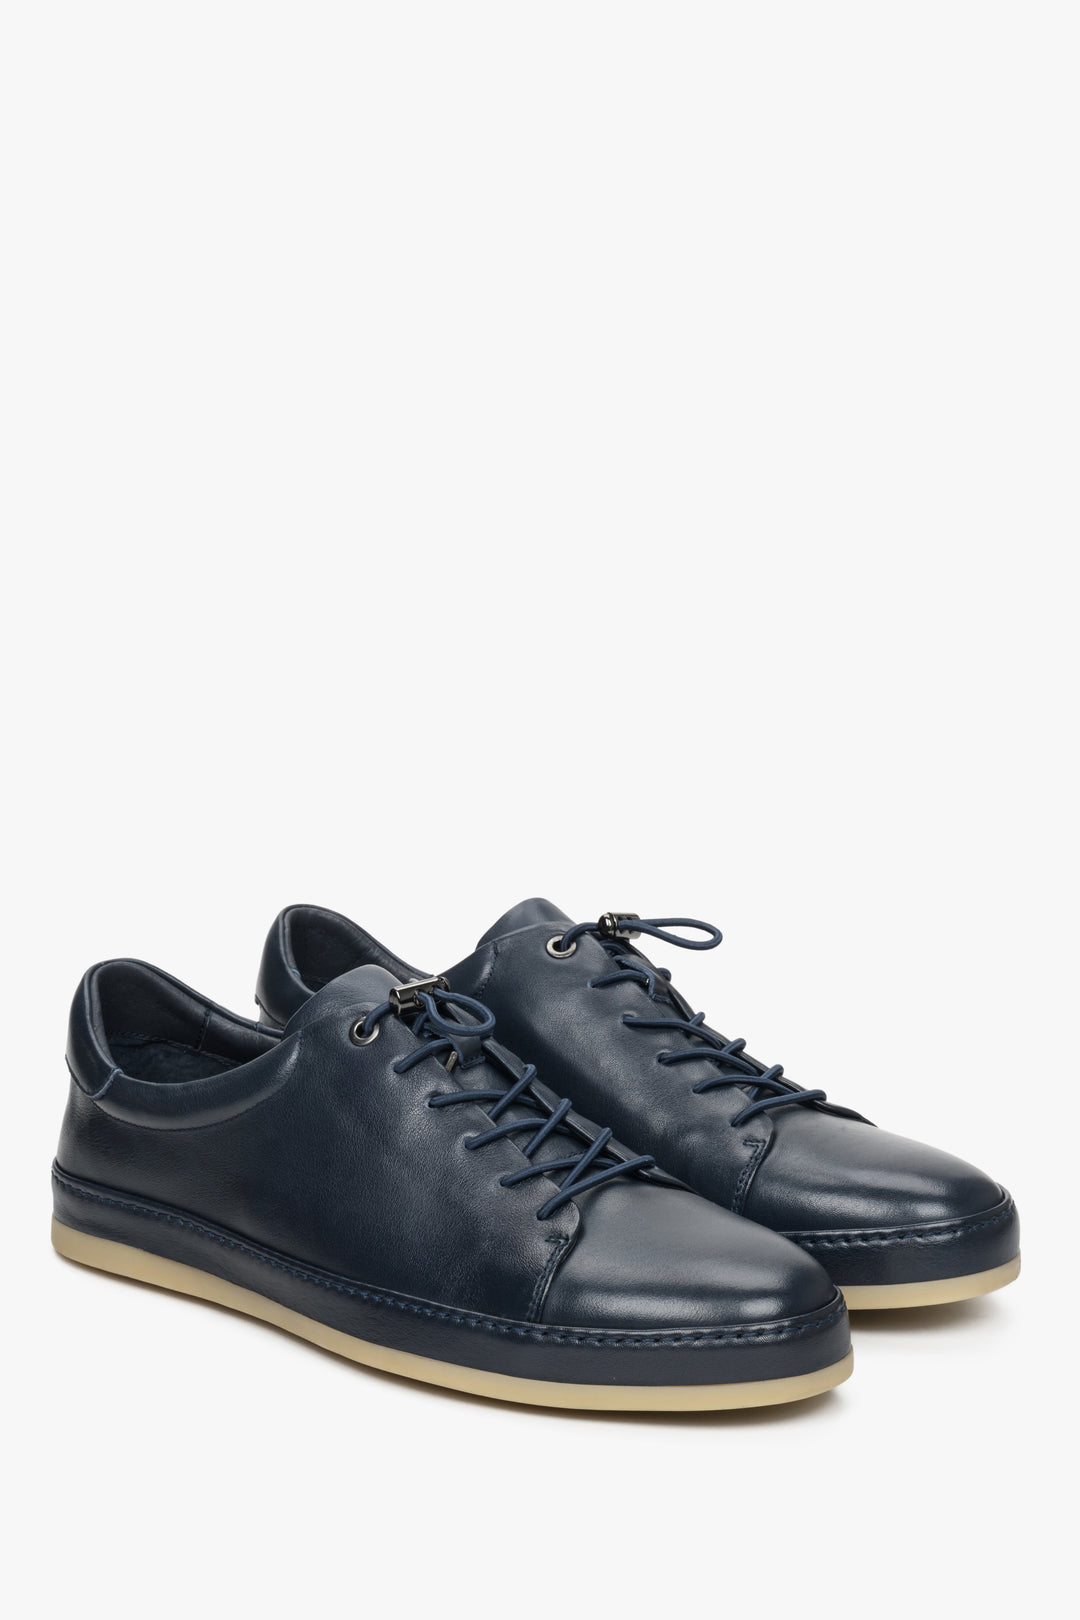 Estro men's leather sneakers in navy blue color - presentation of the toe and side seam of the shoes.